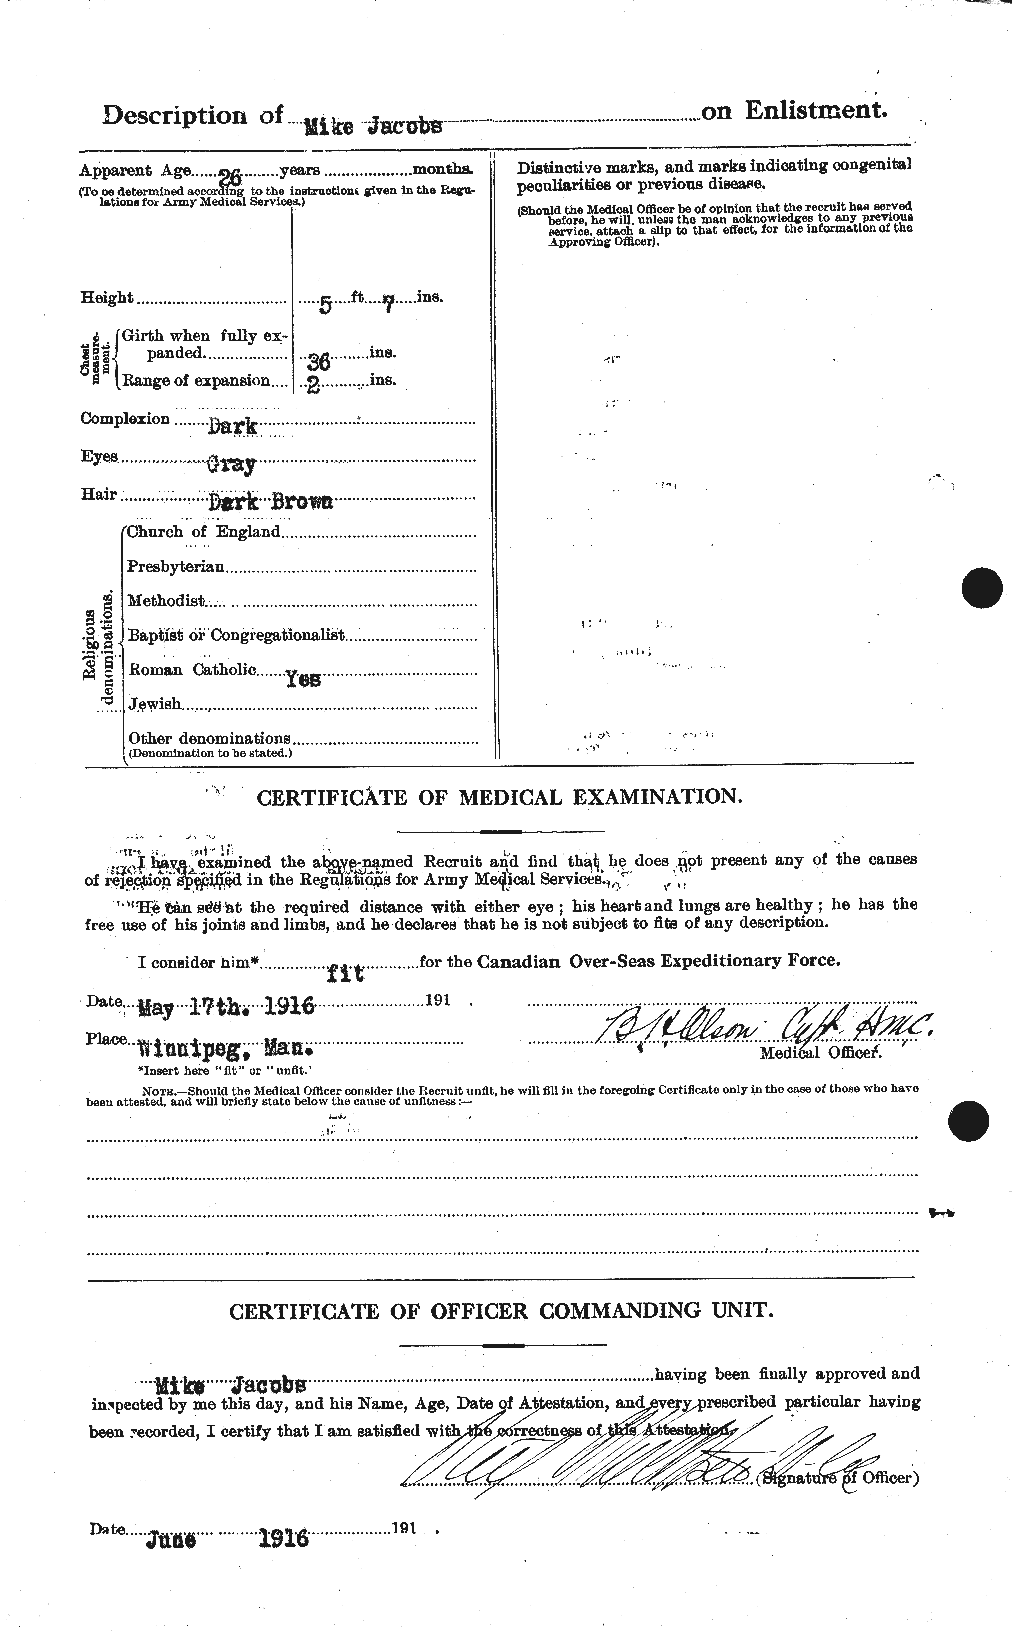 Personnel Records of the First World War - CEF 413189b